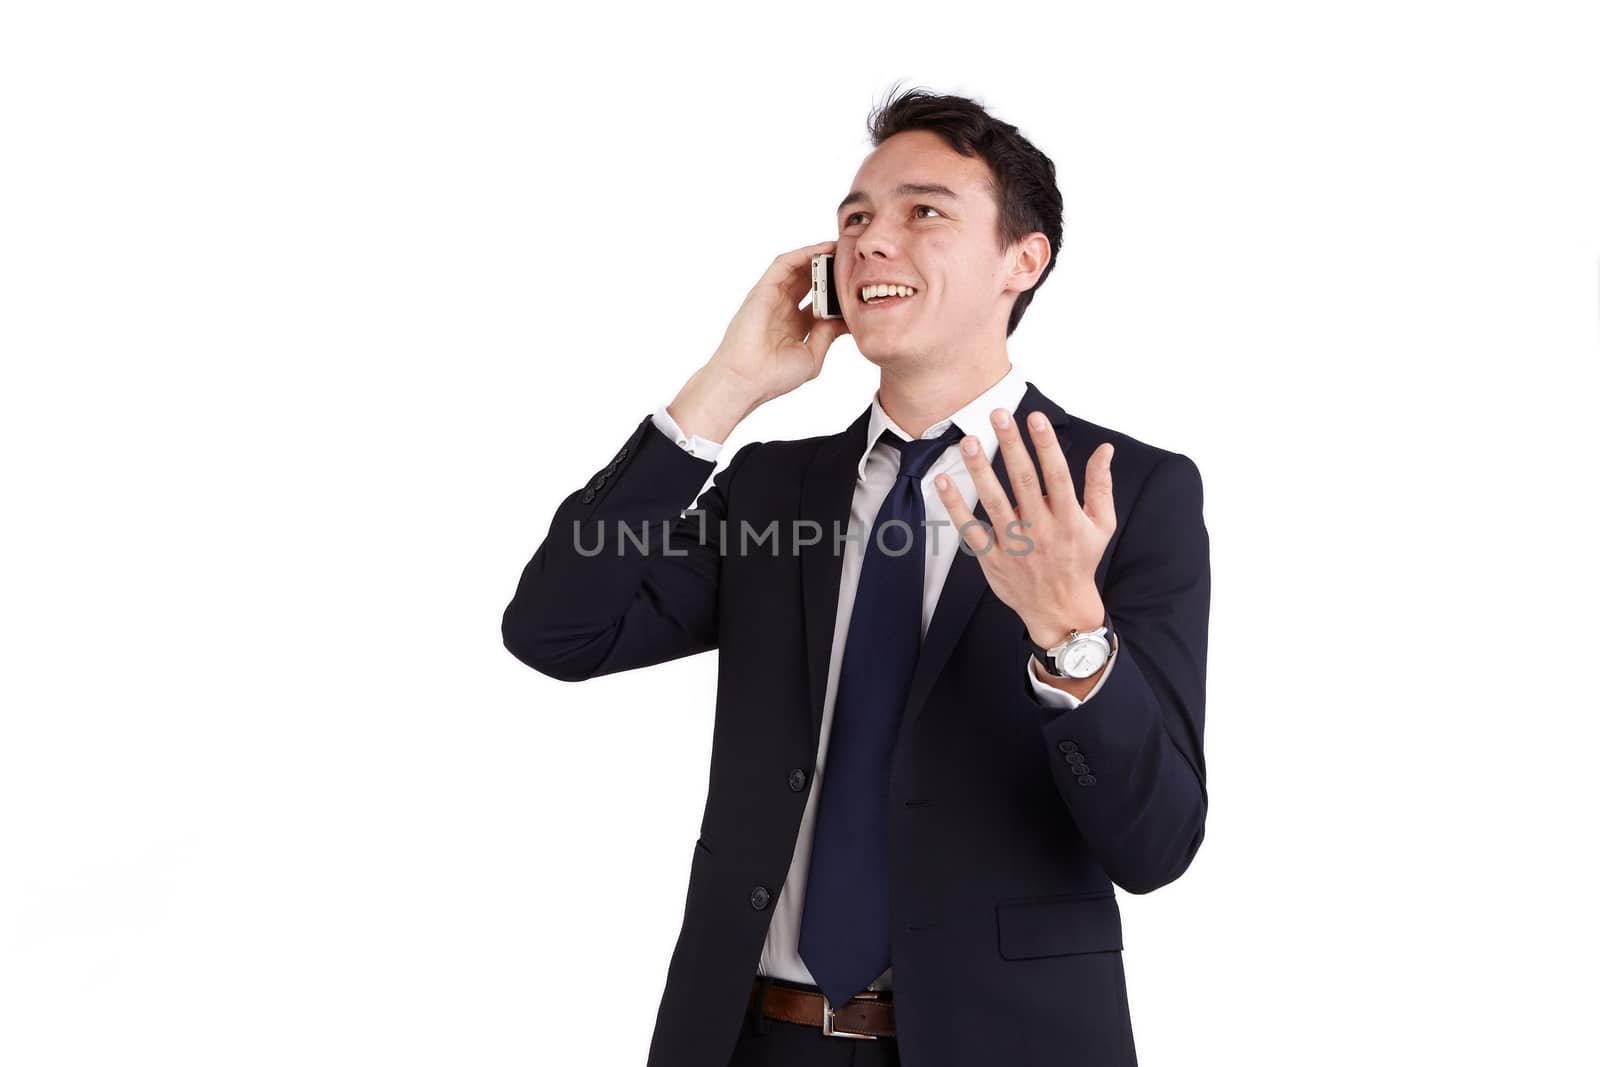 A young caucasian male businessman smiling holding a mobile phone while raising his hand looking away from camera.